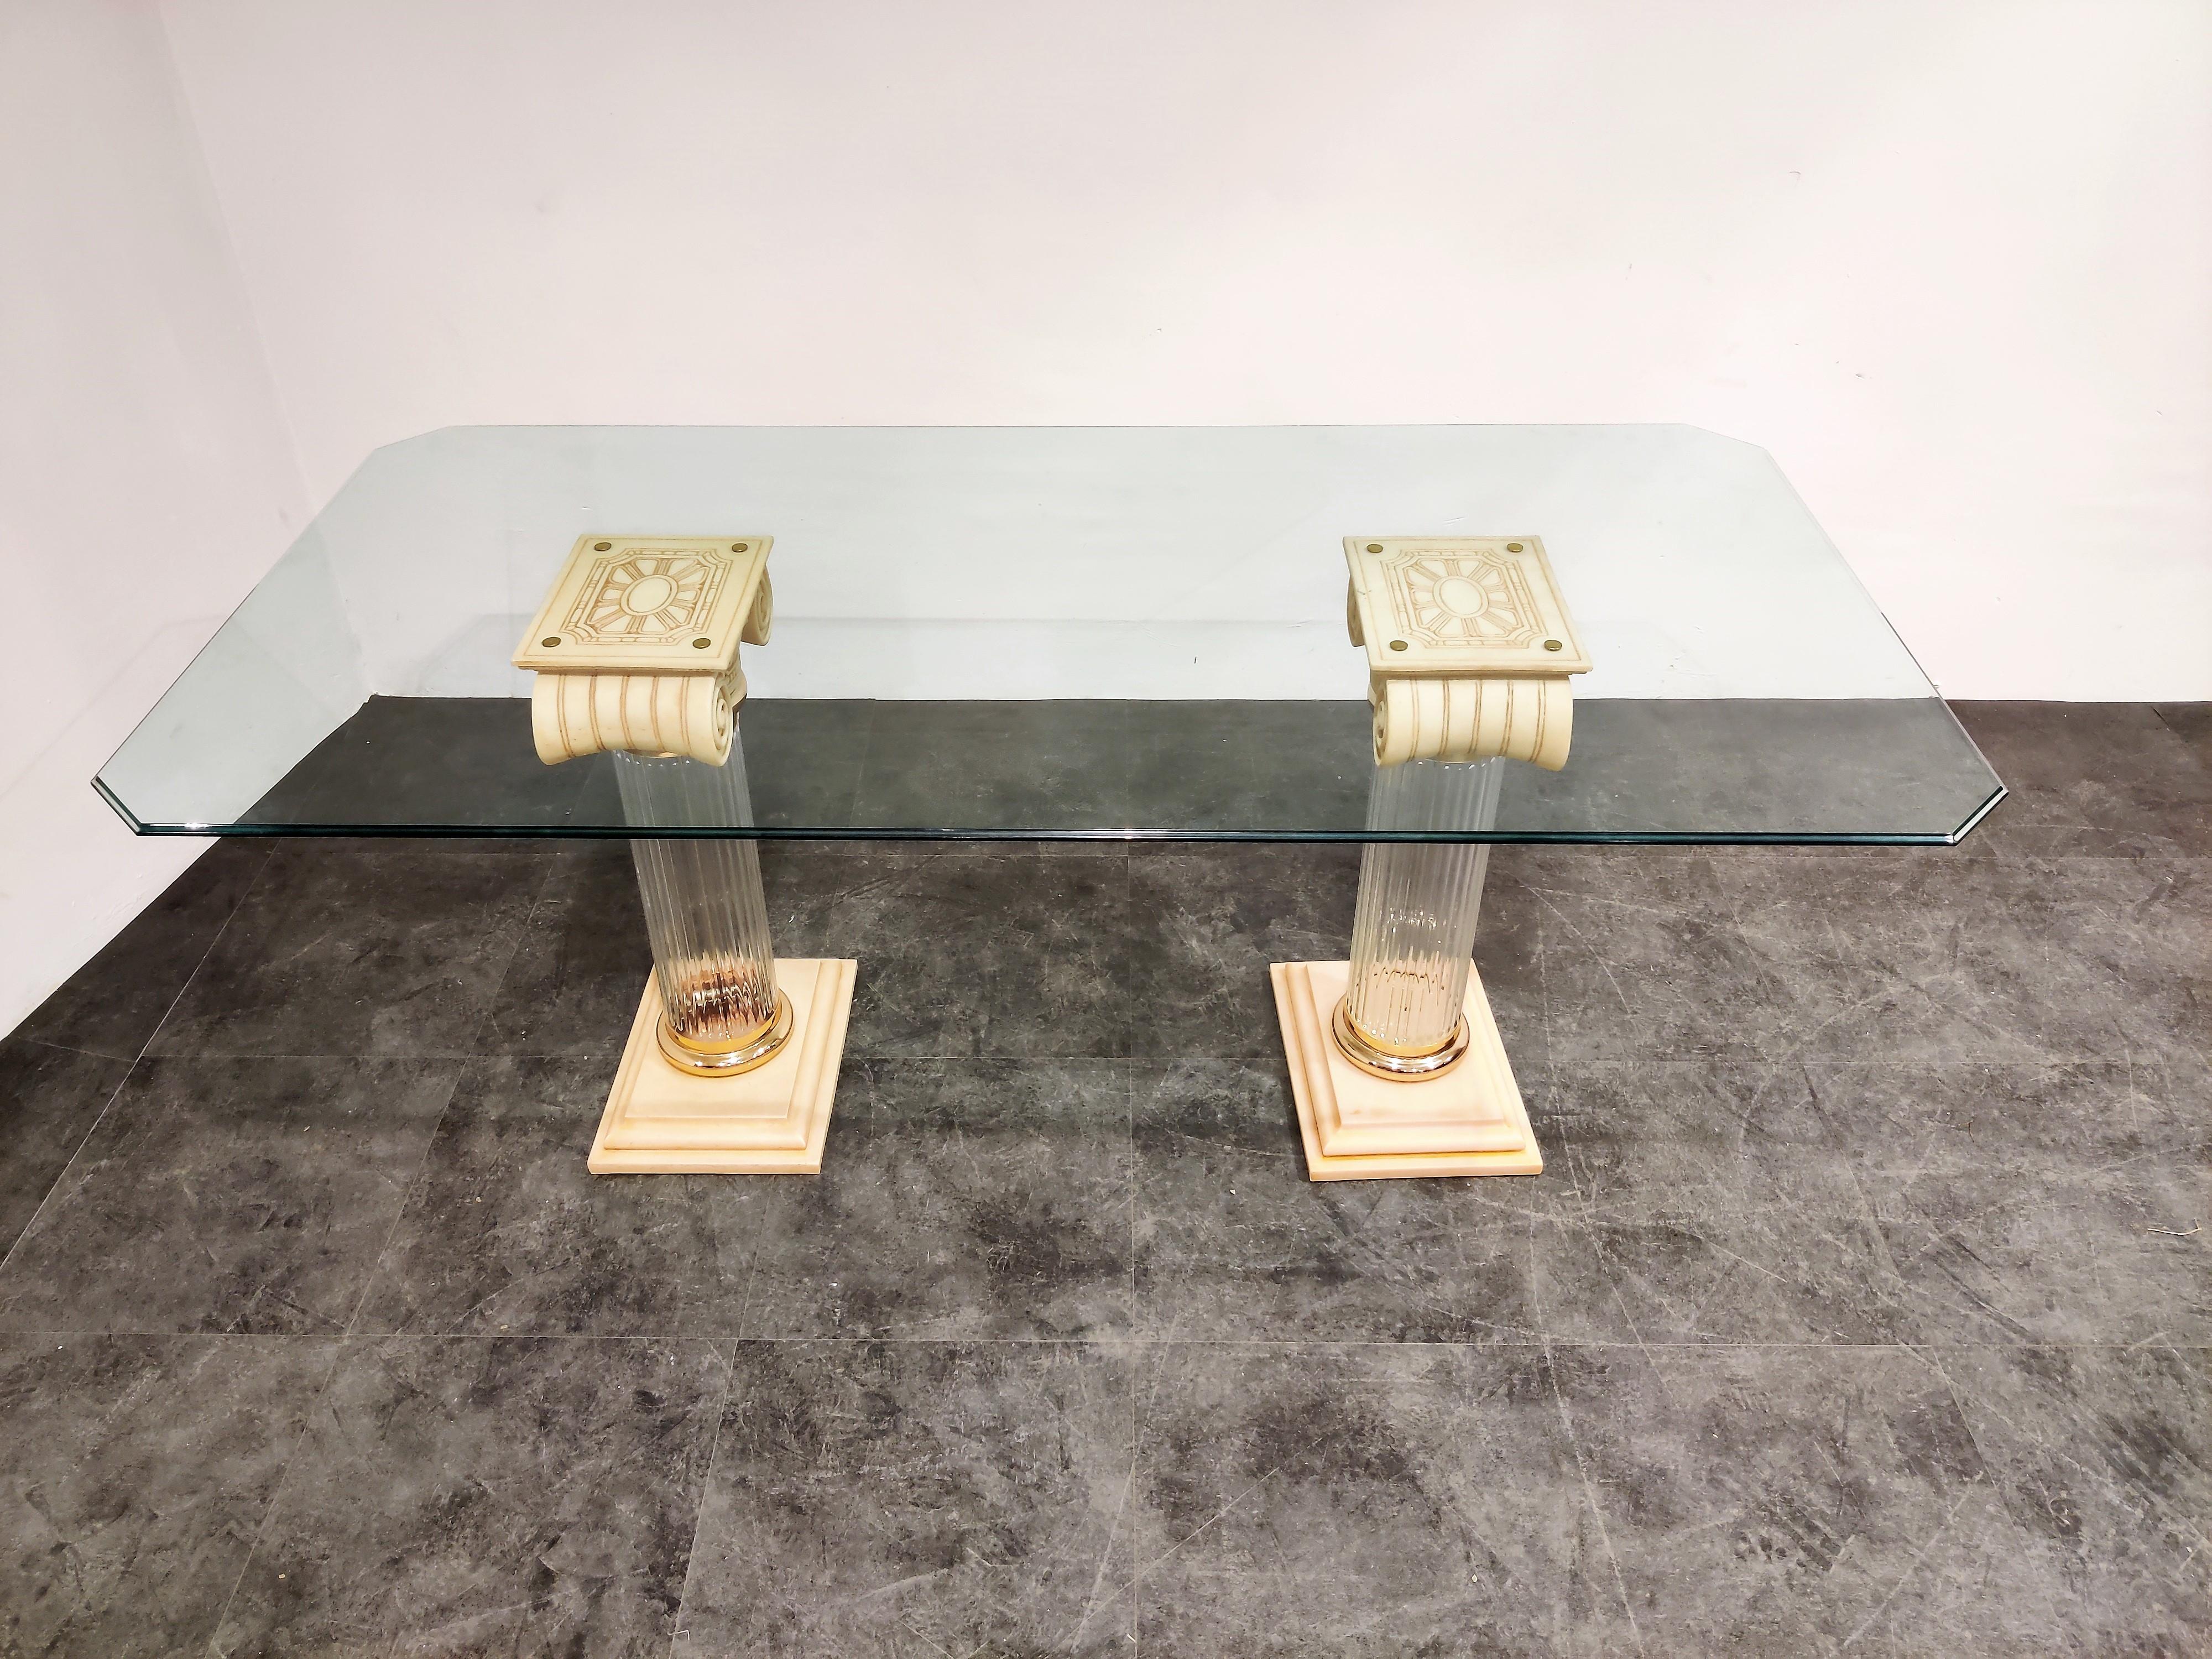 Remarkable dining table consisting of two geek style columns made from Lucite, brass and resin with a clear beveled glass top.

Eyecatcher for your dining room. 

Good condition

1980s, Belgium

Measures: Height 74cm/ 29.13